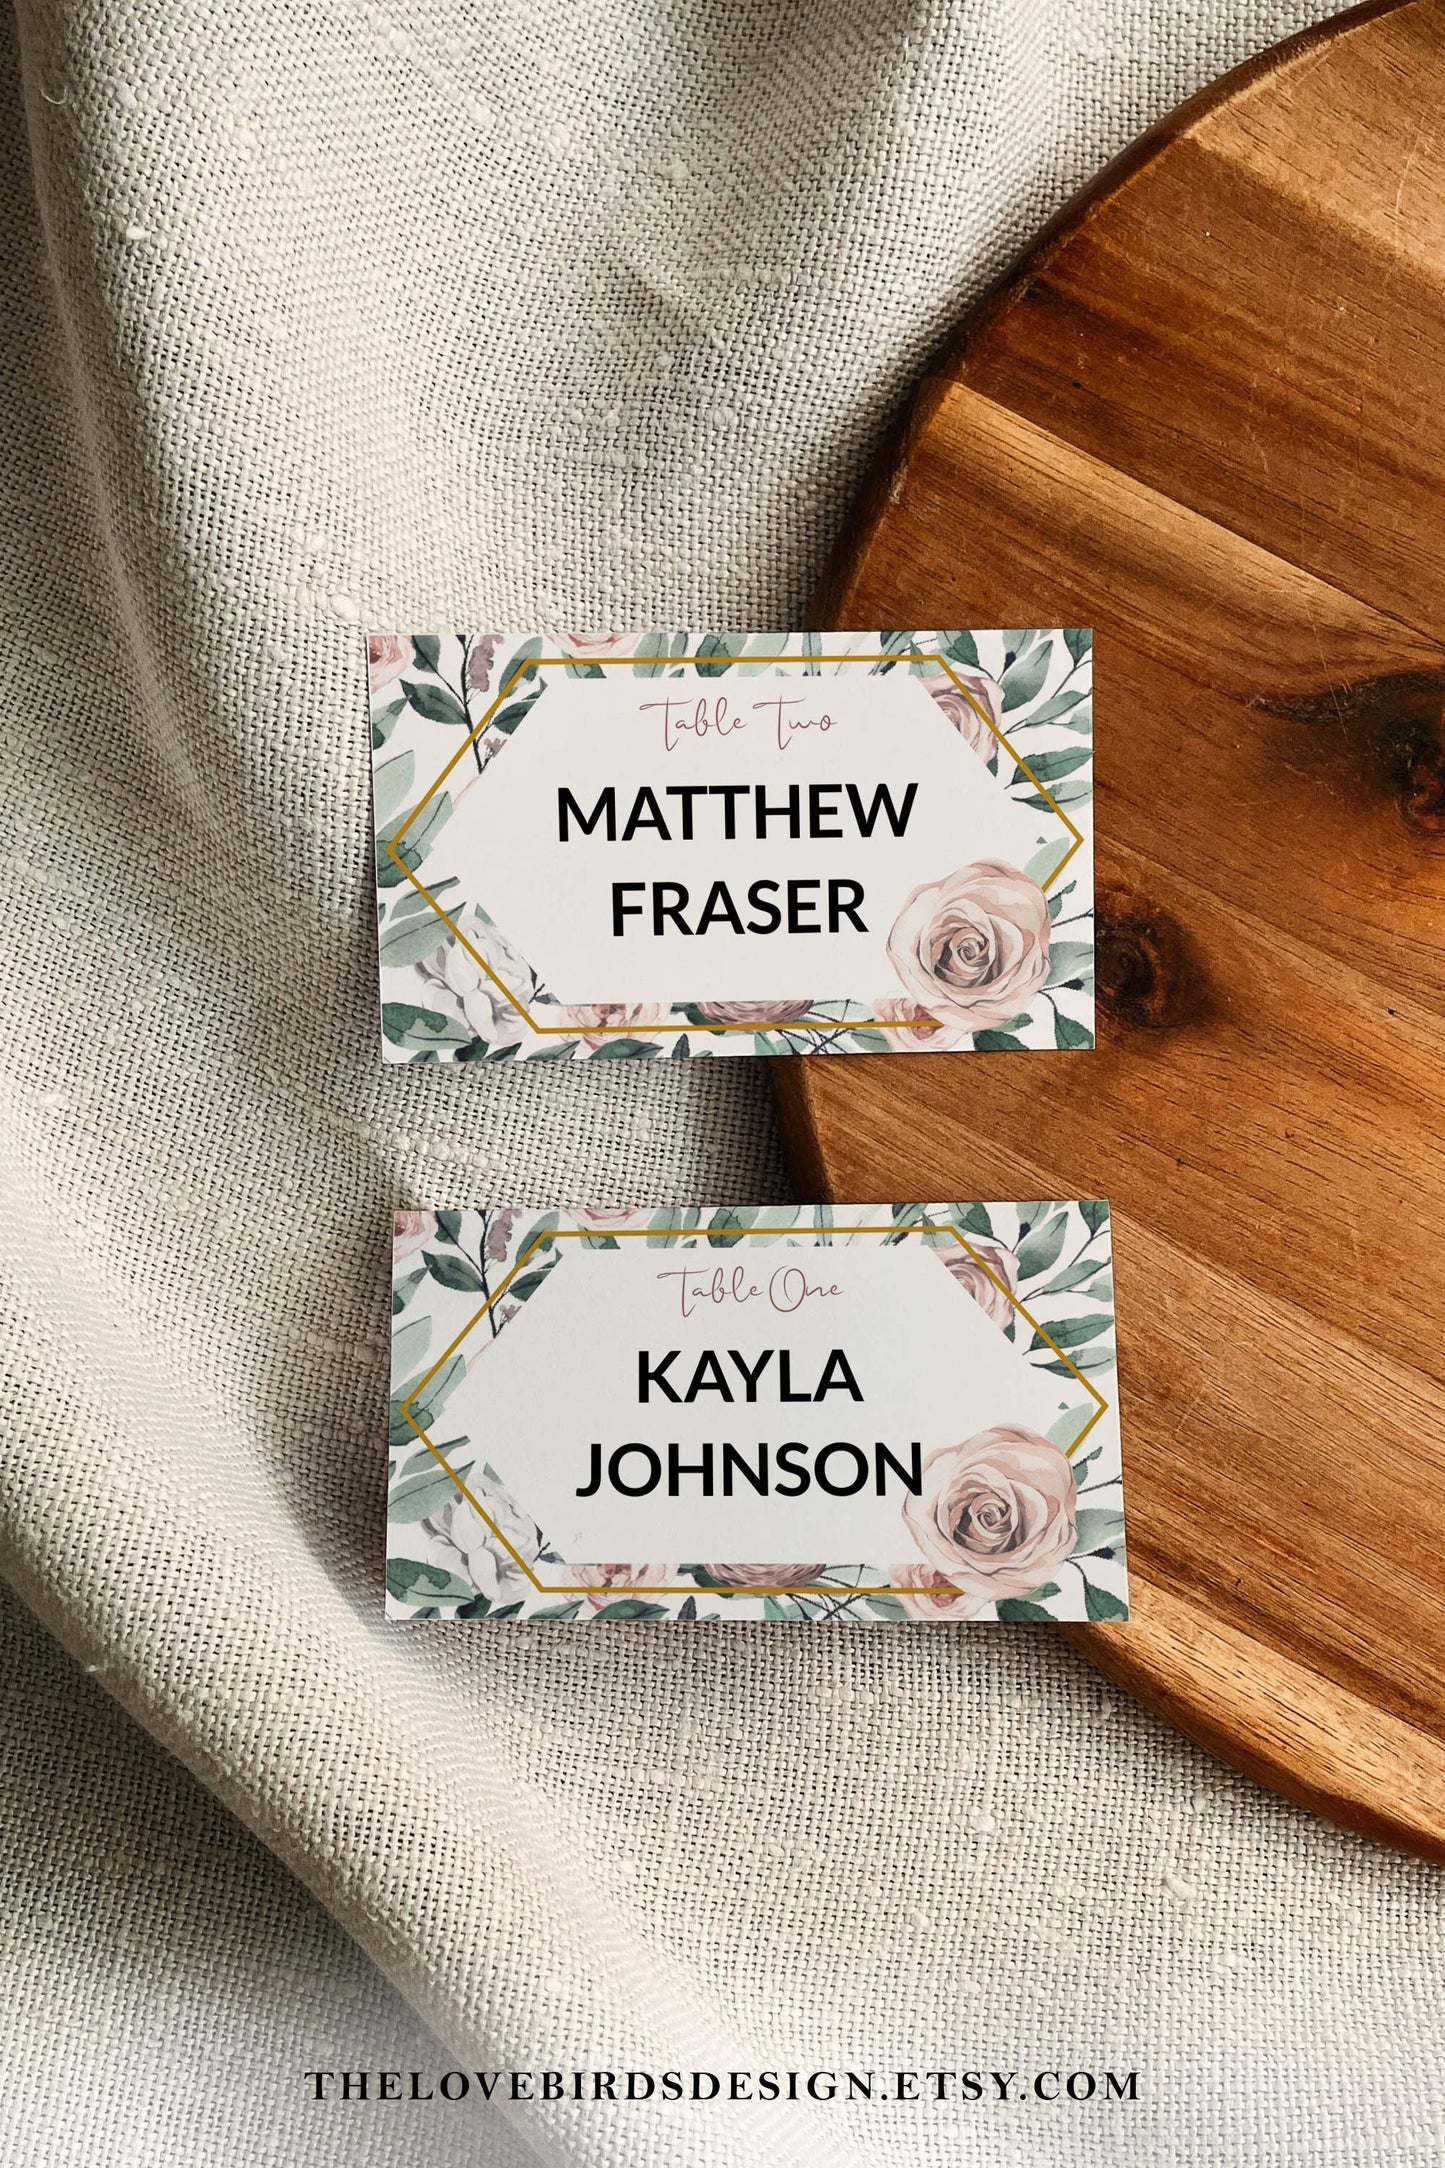 Whimsical Wedding Place Cards Template for Wedding Table Decor or Birthday Bridal Shower or Baby Shower #075